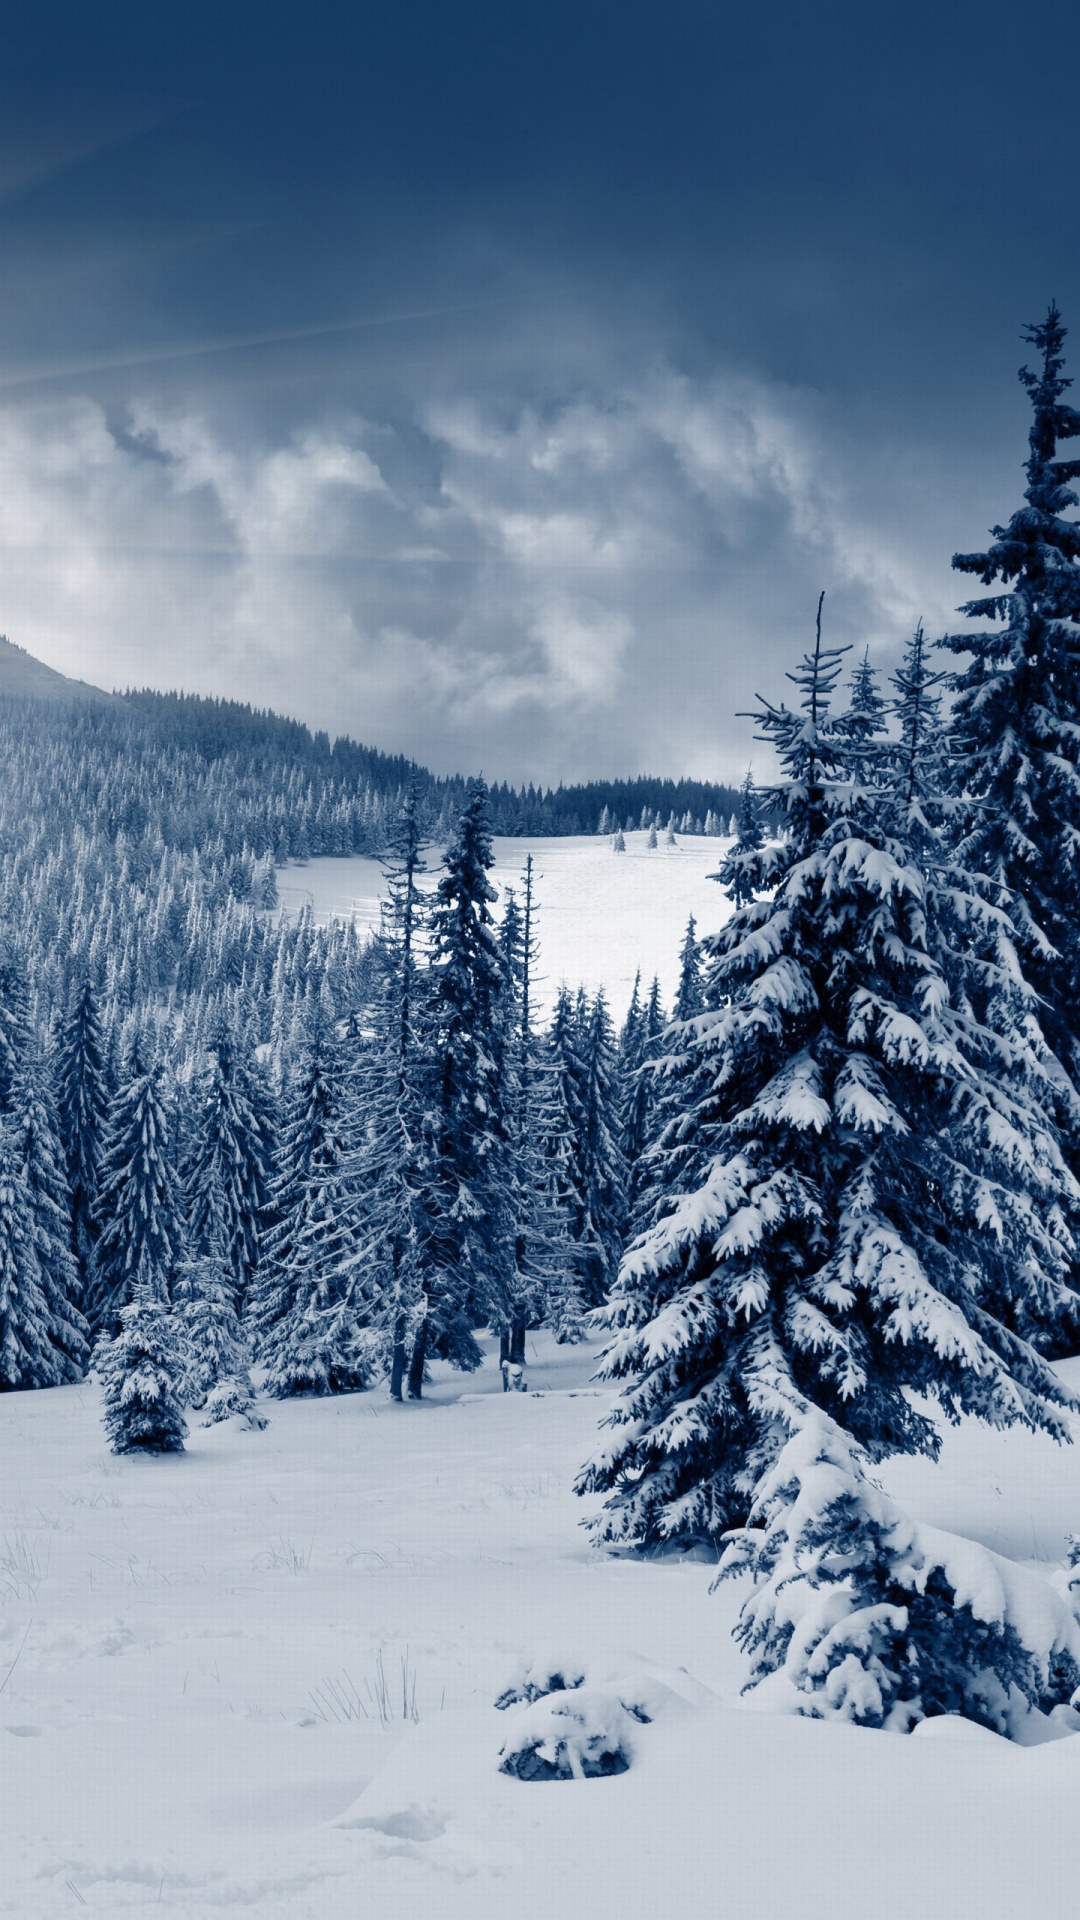 Spruces in Winter Forest wallpaper 1080x1920